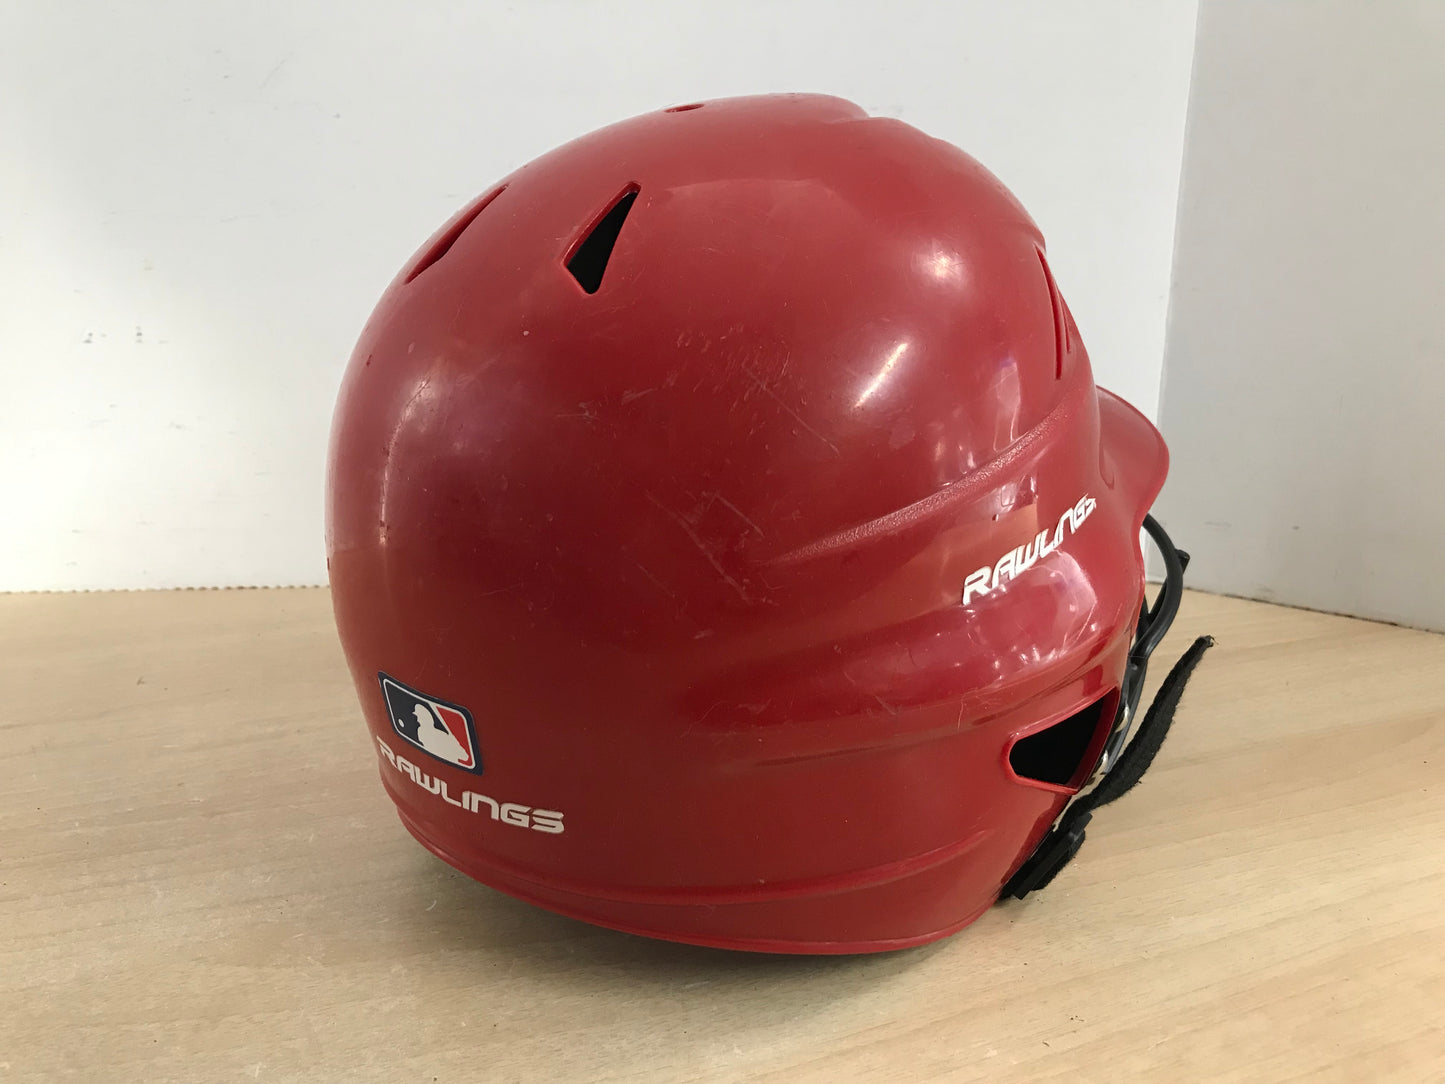 Baseball Helmet Child Size 6.5-7.5 inch Rawlings With Cage Red Black